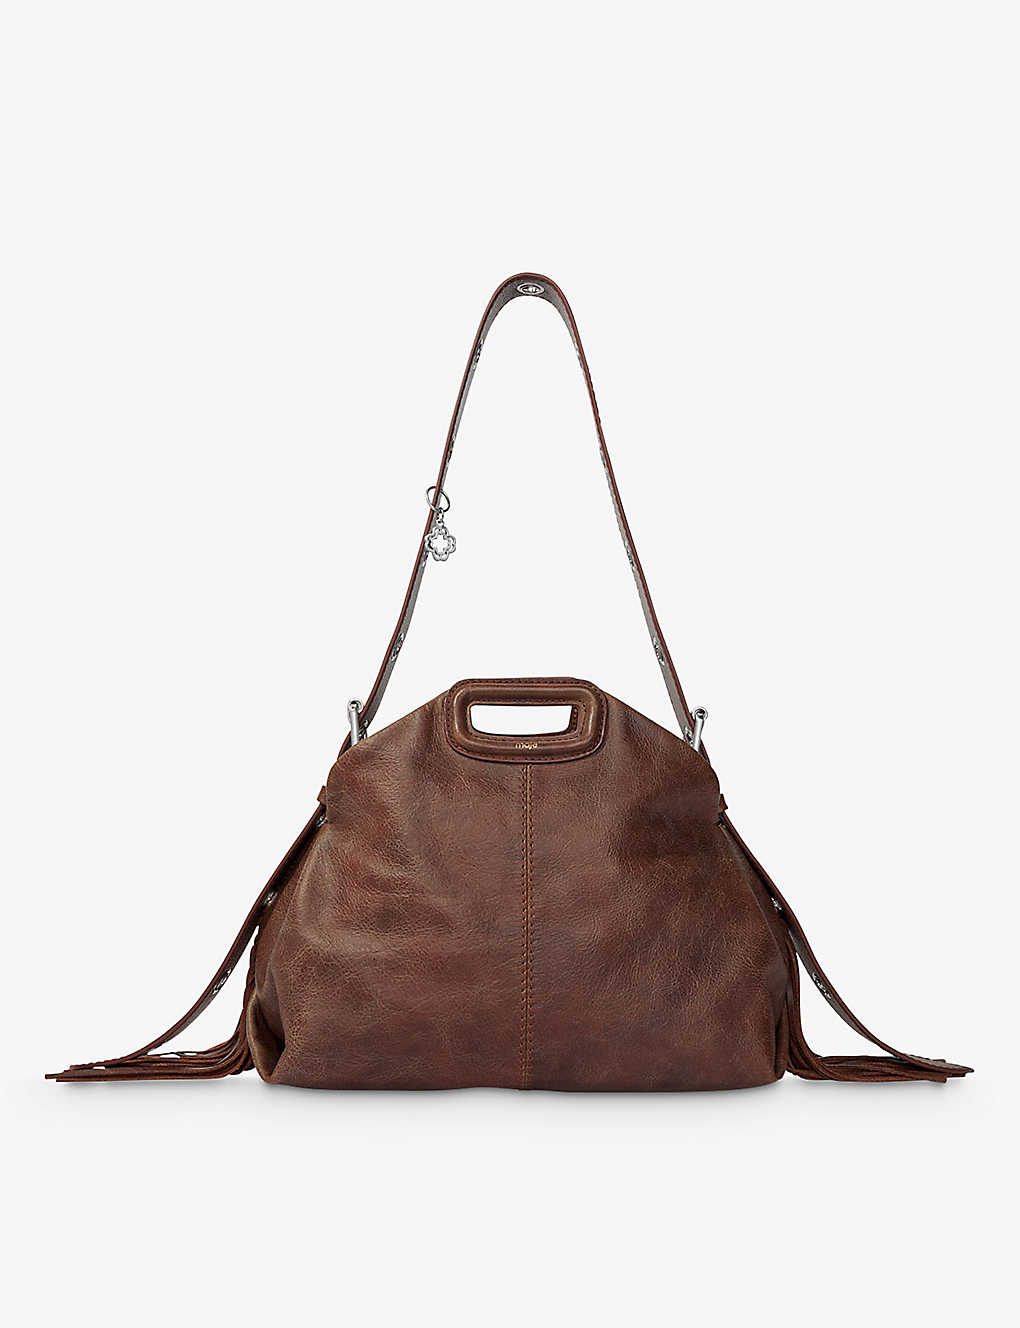 Maje Miss M Leather Tote Bag In Marron/brown